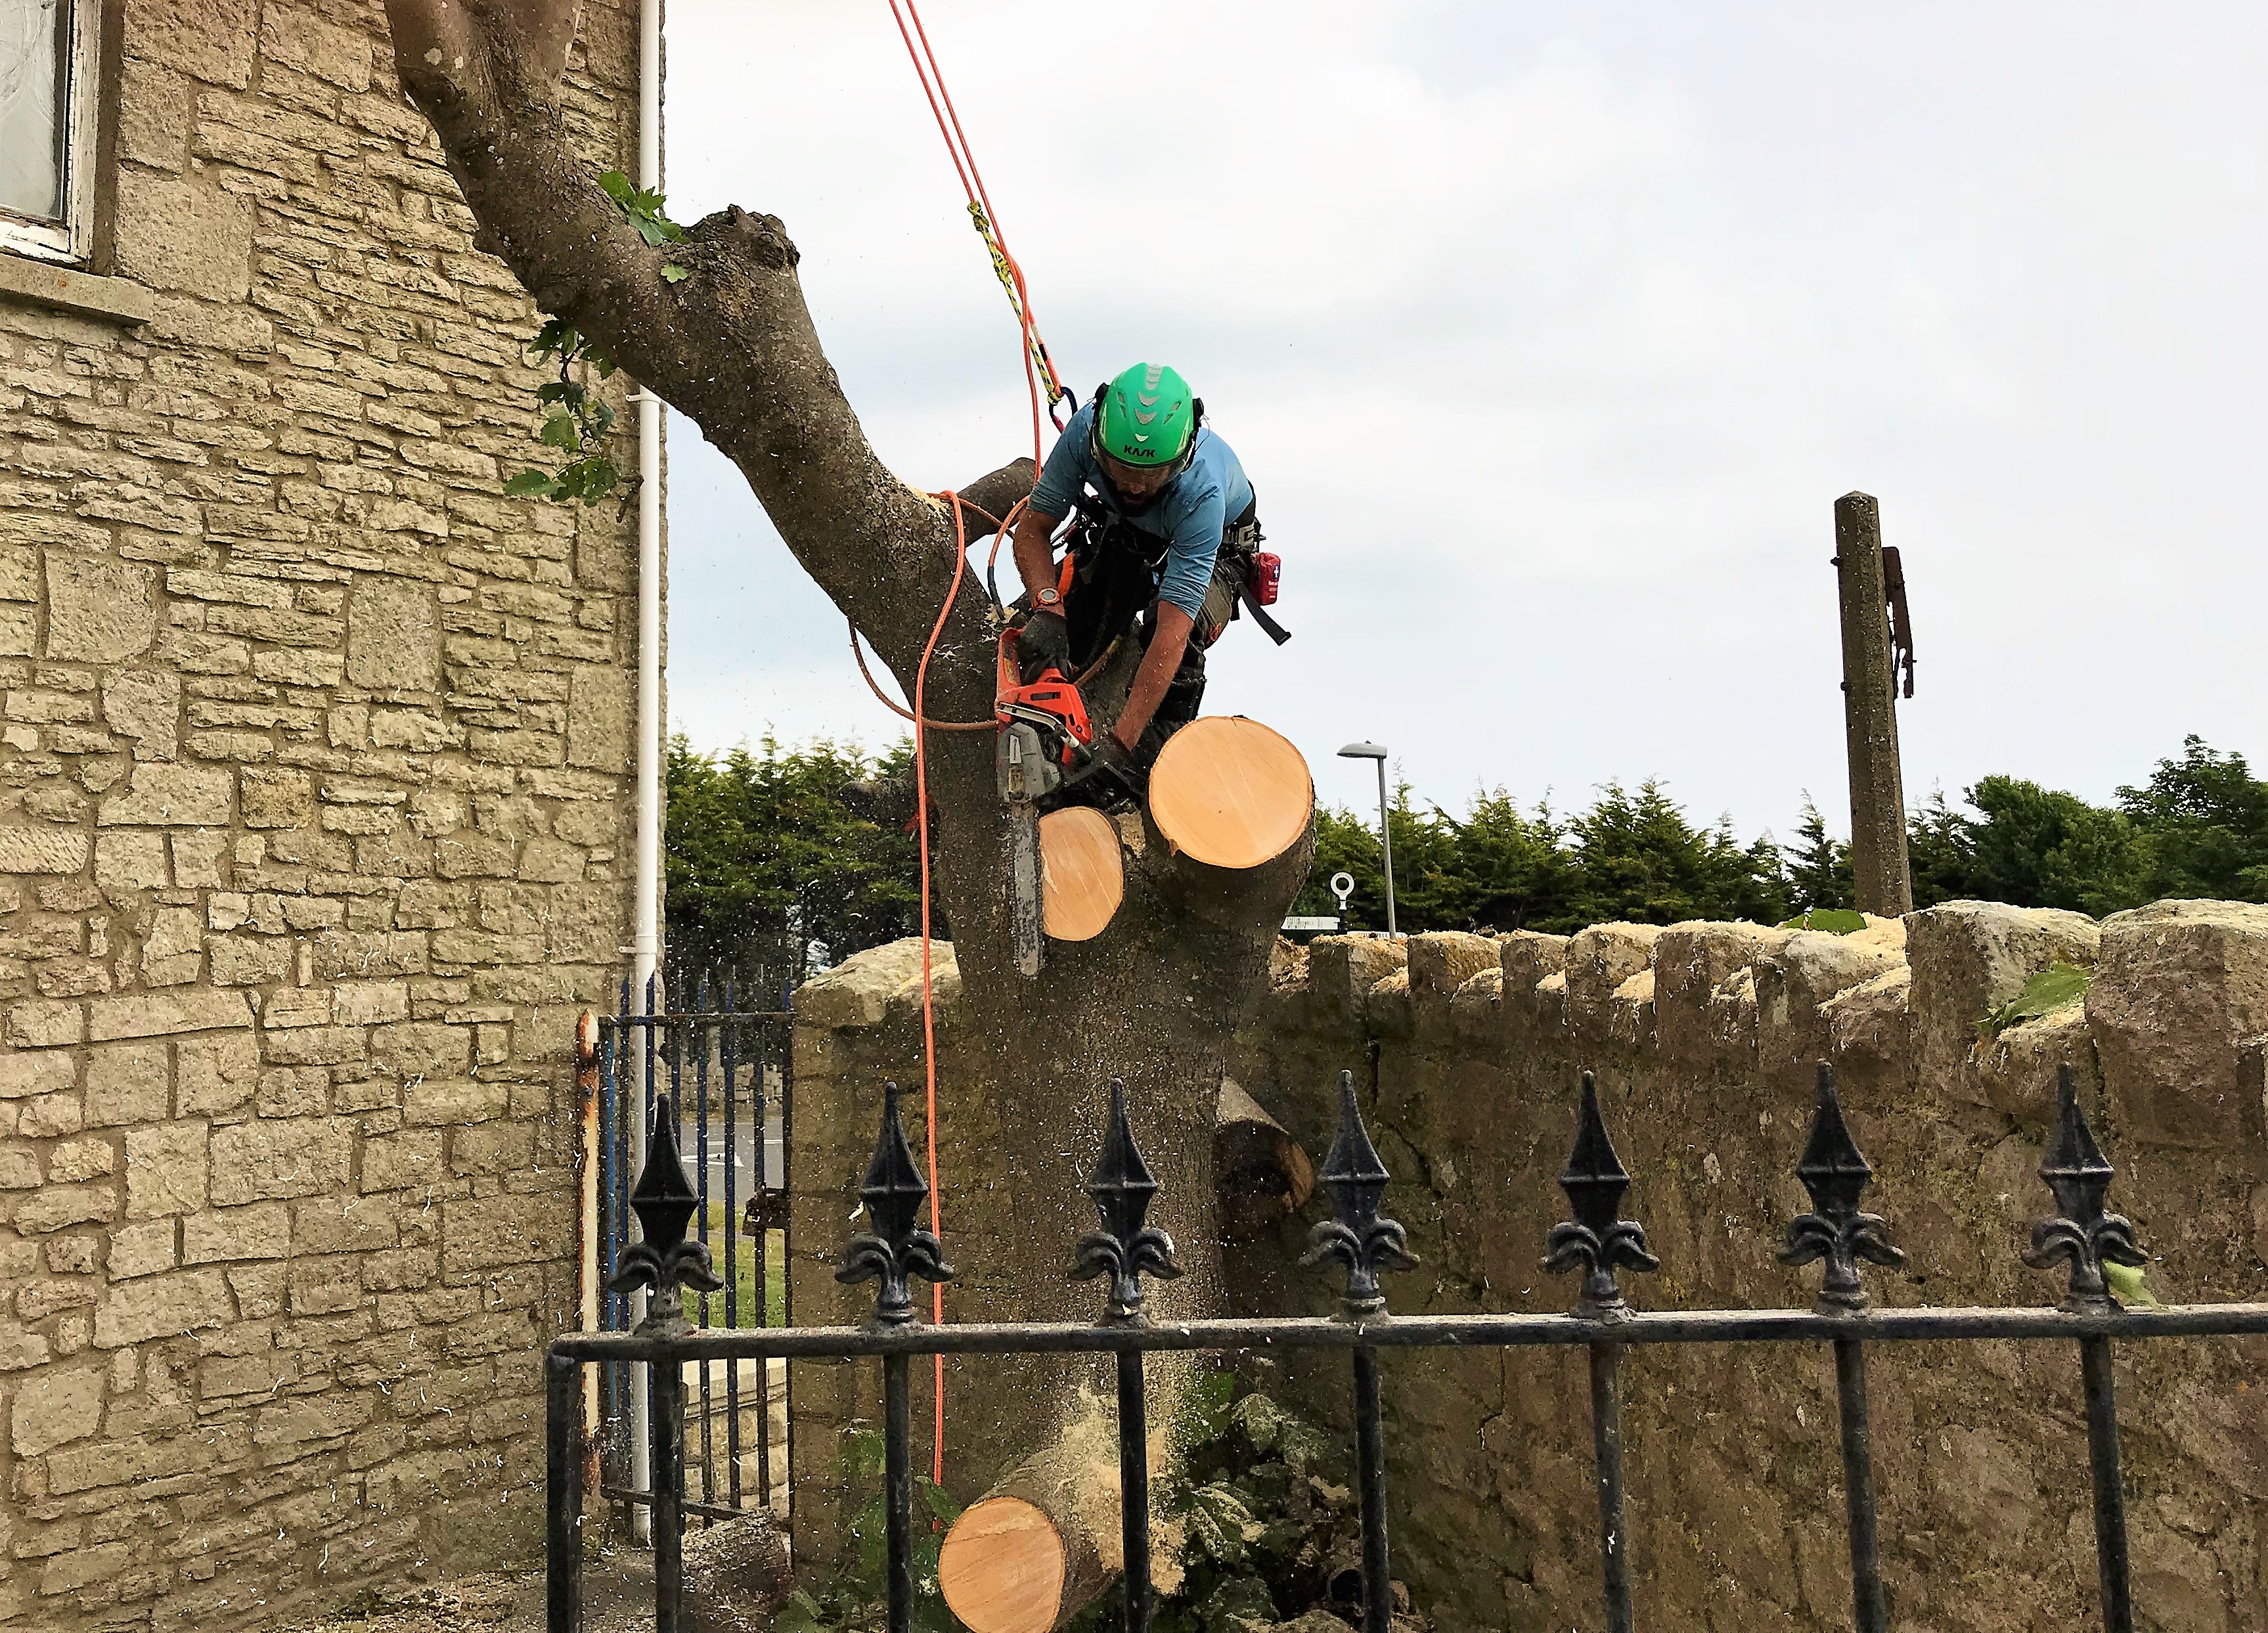 Weymouth Tree Surgeon | Tree services in Weymouth, Portland, Dorchester in south Dorset - Weymouth tree services, Dorchester Tree Services, Tree services in Portland, Dorset  - Tree Care, Tree Removal, Emergency tree services, Hedge Cutting / Trimming, Stump Grinding, Garden Maintenance, Garden Clearance Service.